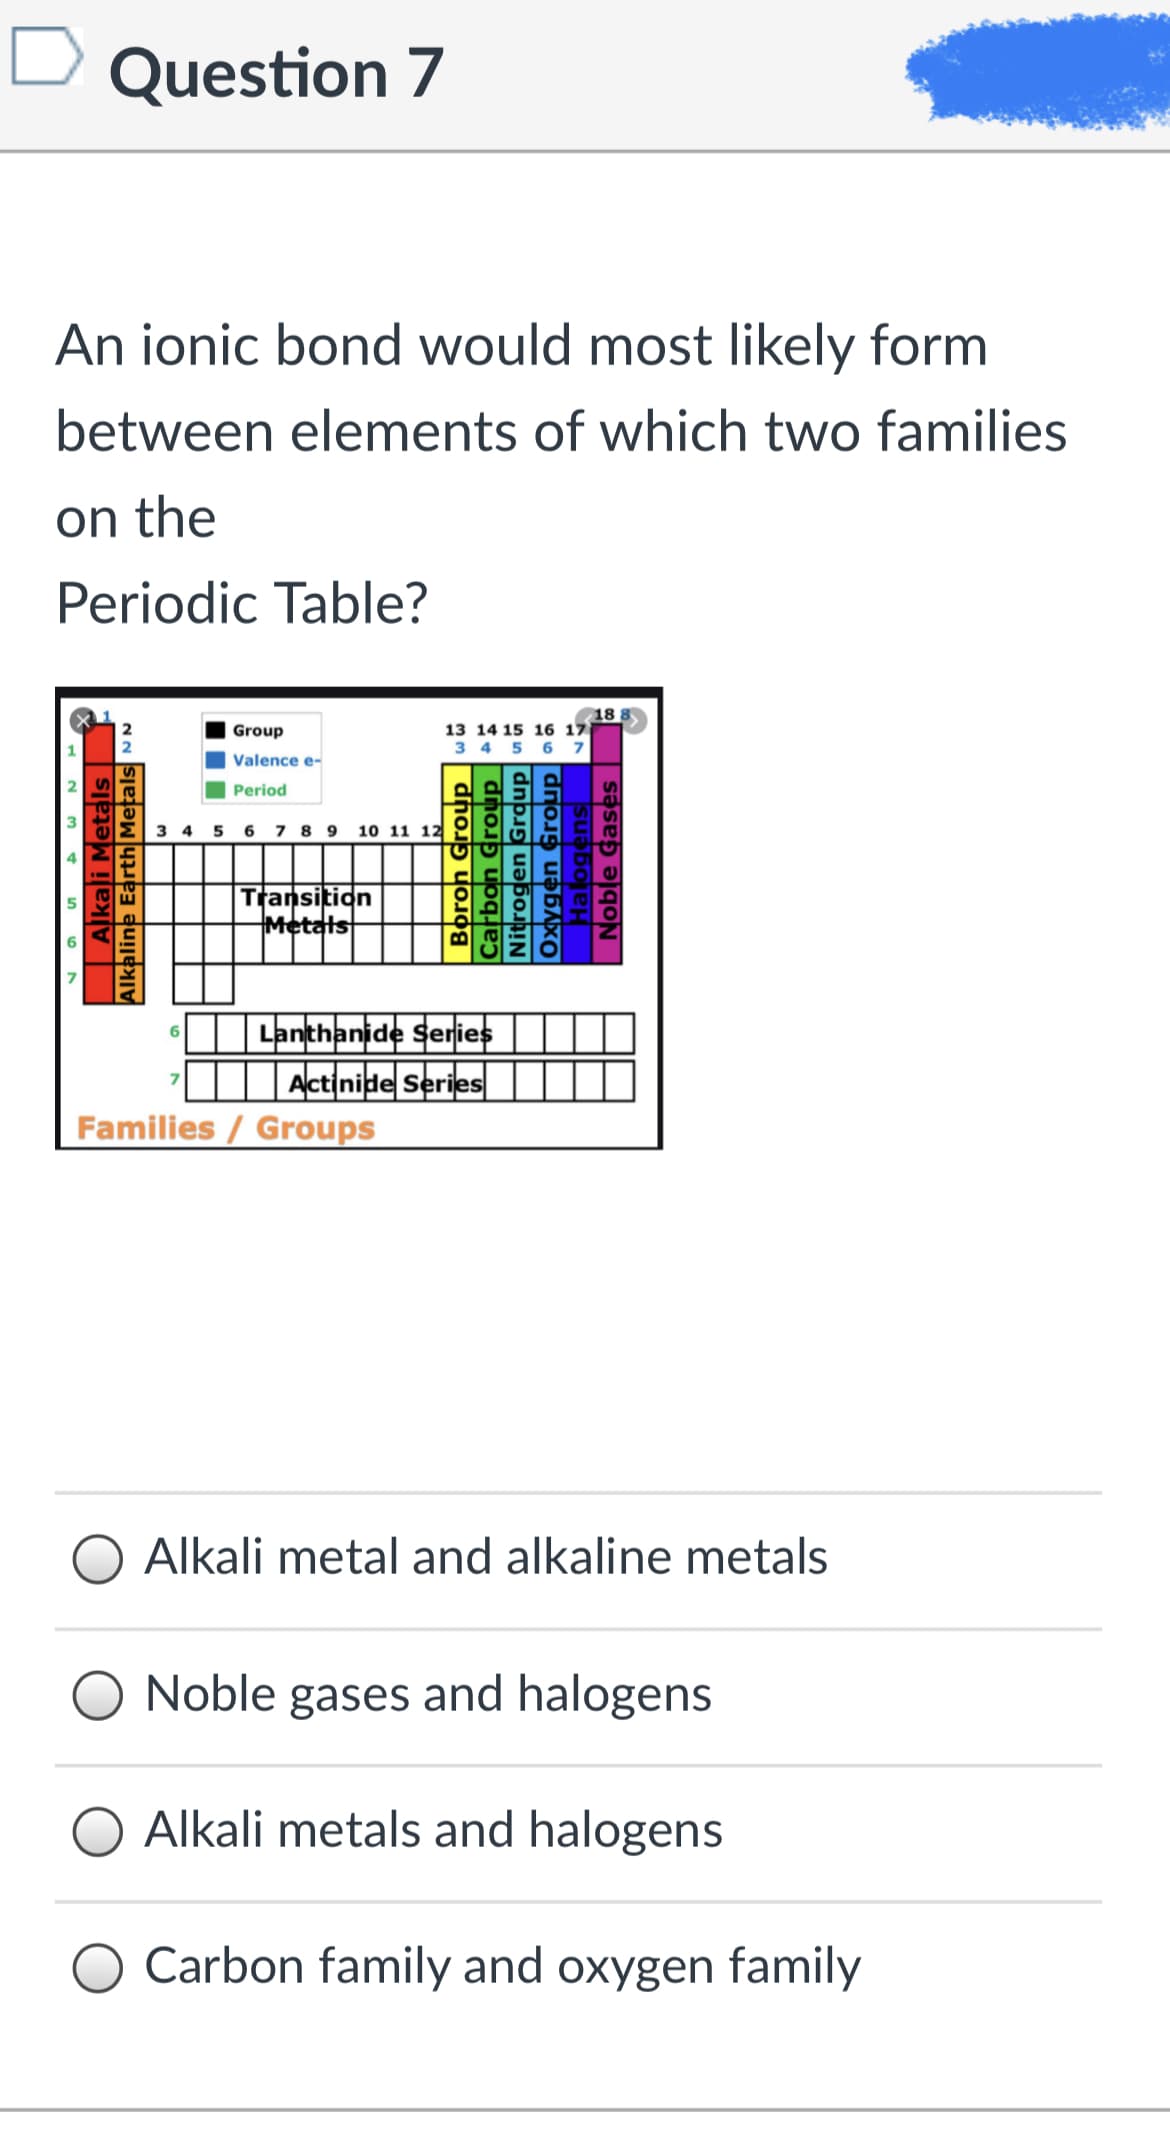 Question 7
An ionic bond would most likely form
between elements of which two families
on the
Periodic Table?
18
13 14 15 16 17
Group
3 4 5 6 7
Valence e-
Period
3
4 5 6 7 8 9 10 11 12
Transition
Metals
Lanthanide Series
Actinide Series
Families / Groups
Alkali metal and alkaline metals
Noble gases and halogens
Alkali metals and halogens
Carbon family and oxygen family
|Alkali Metals|
Alkaline Earth Metals
Boron Group
Carbon Group
Nitrogen Grdup
Noble Gases|
